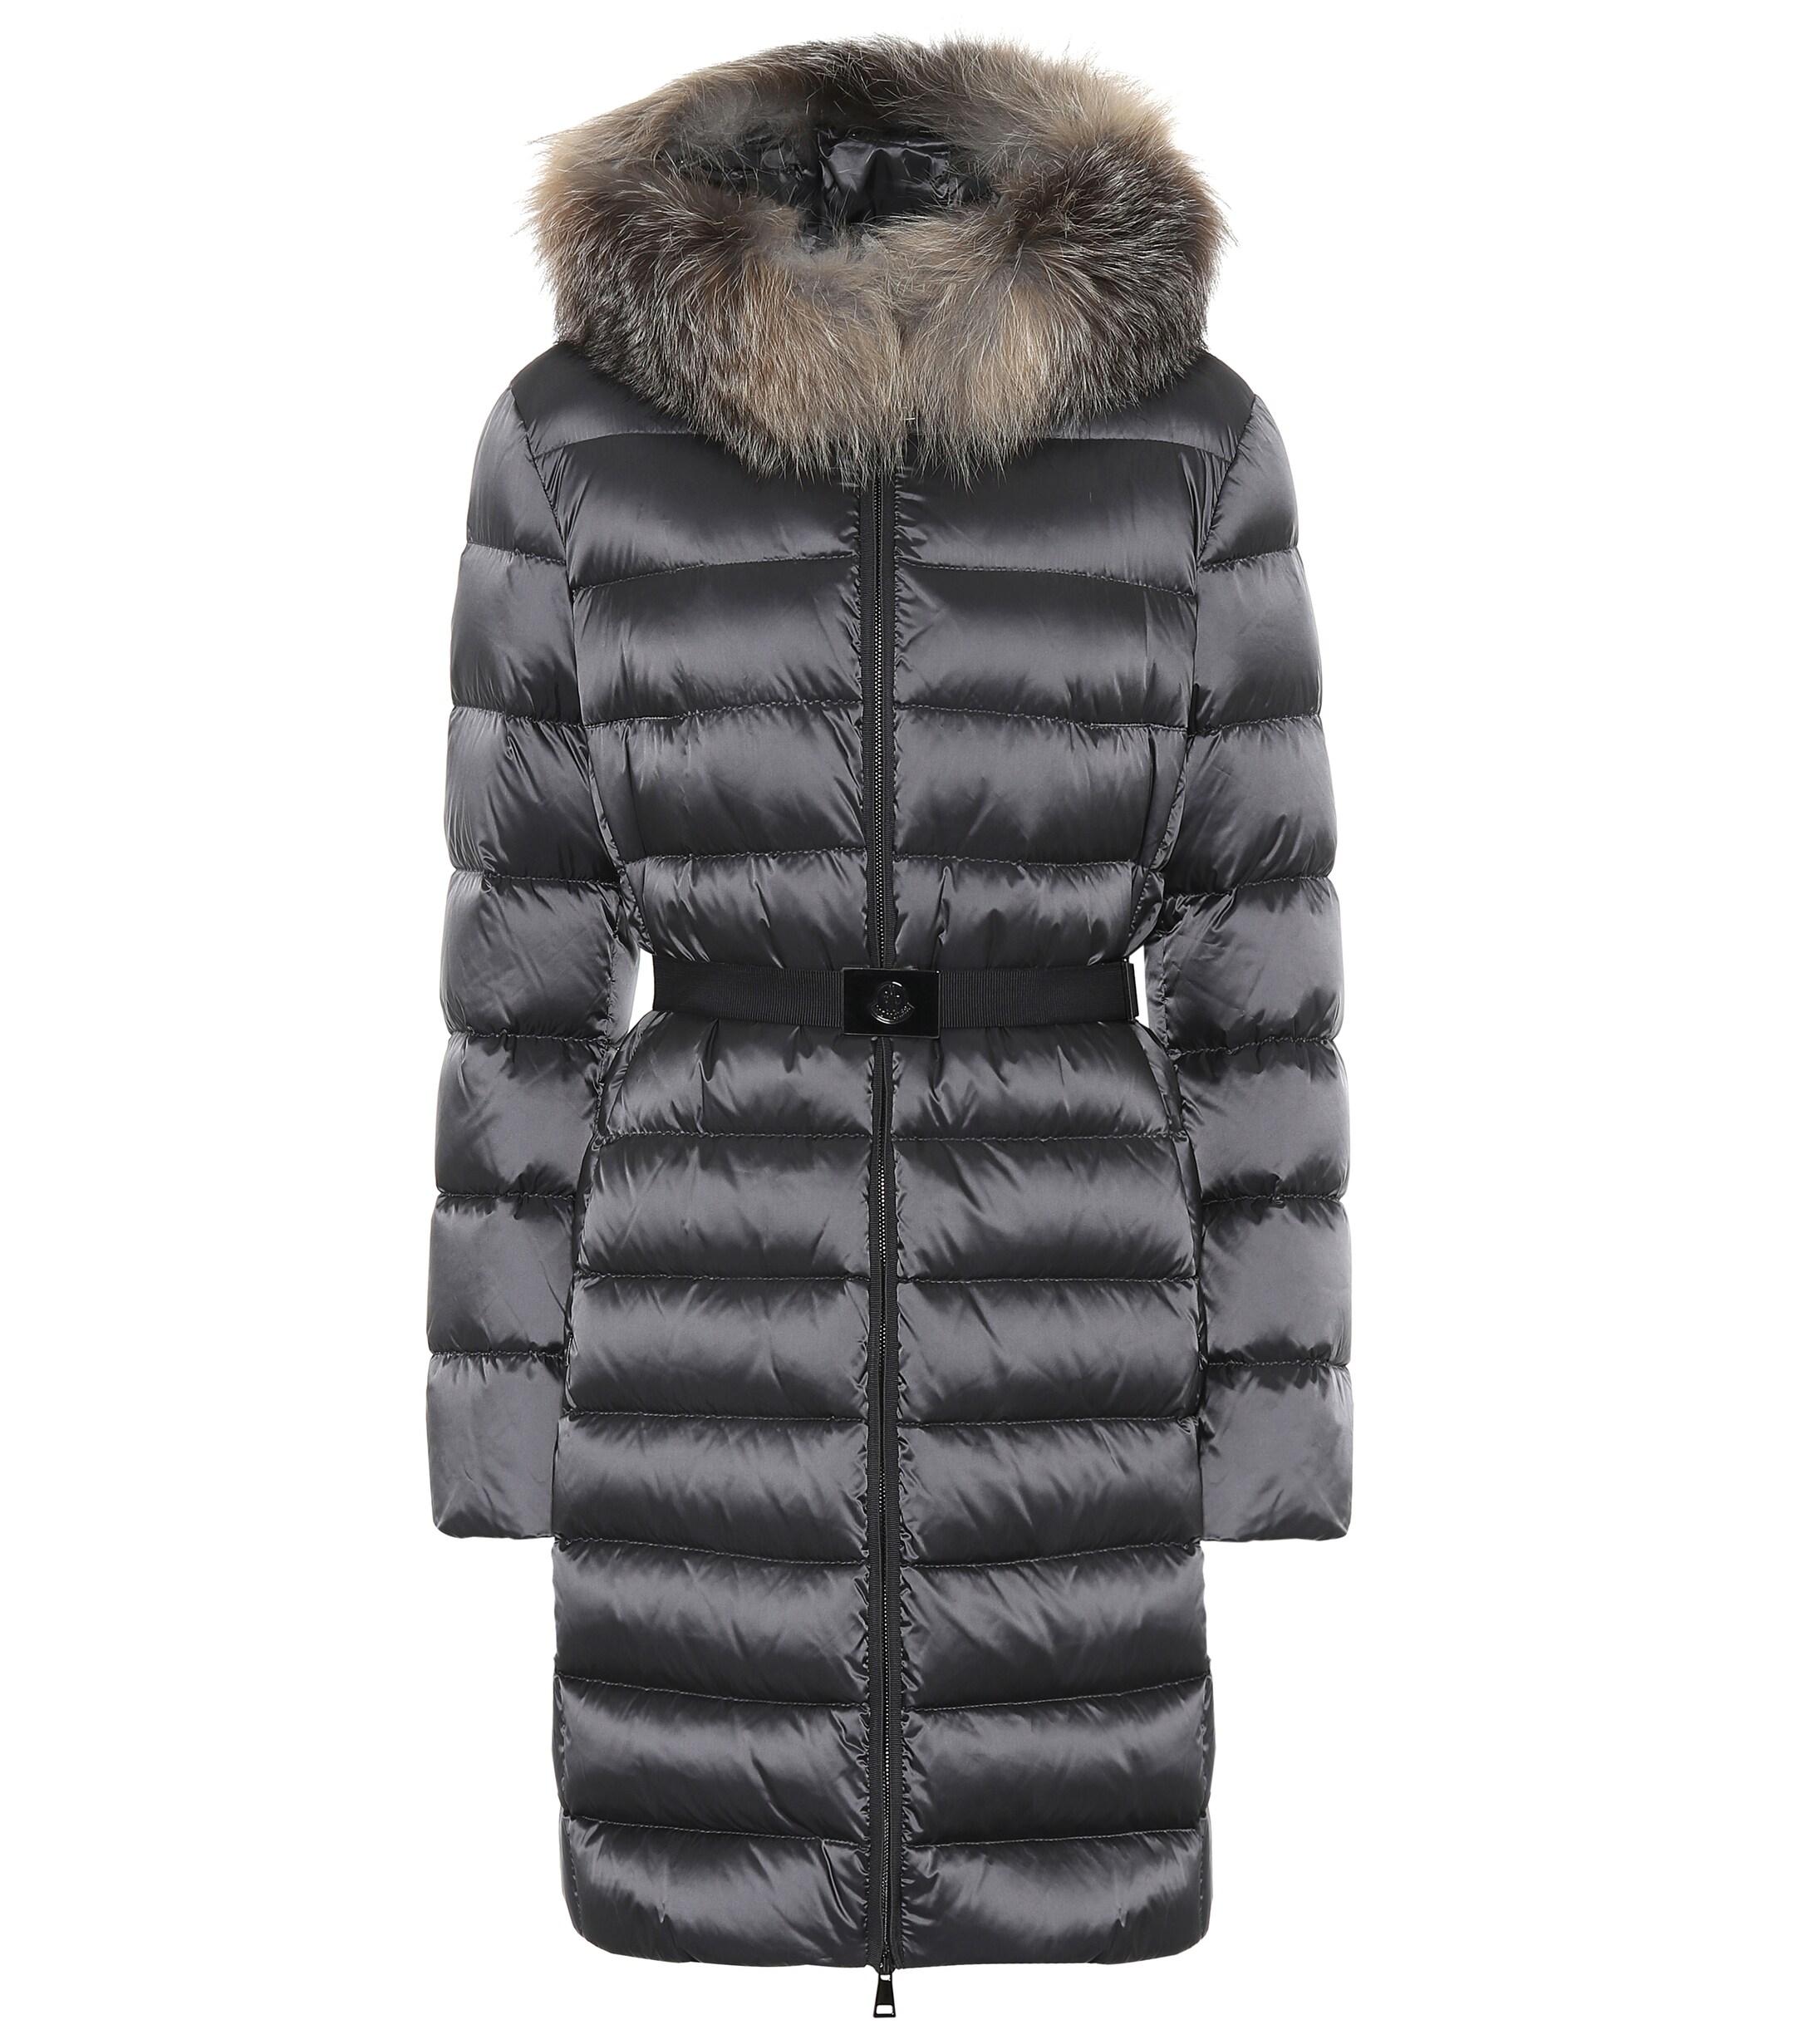 Moncler Synthetic Tinuv Fur-trimmed Down Coat in Black - Lyst